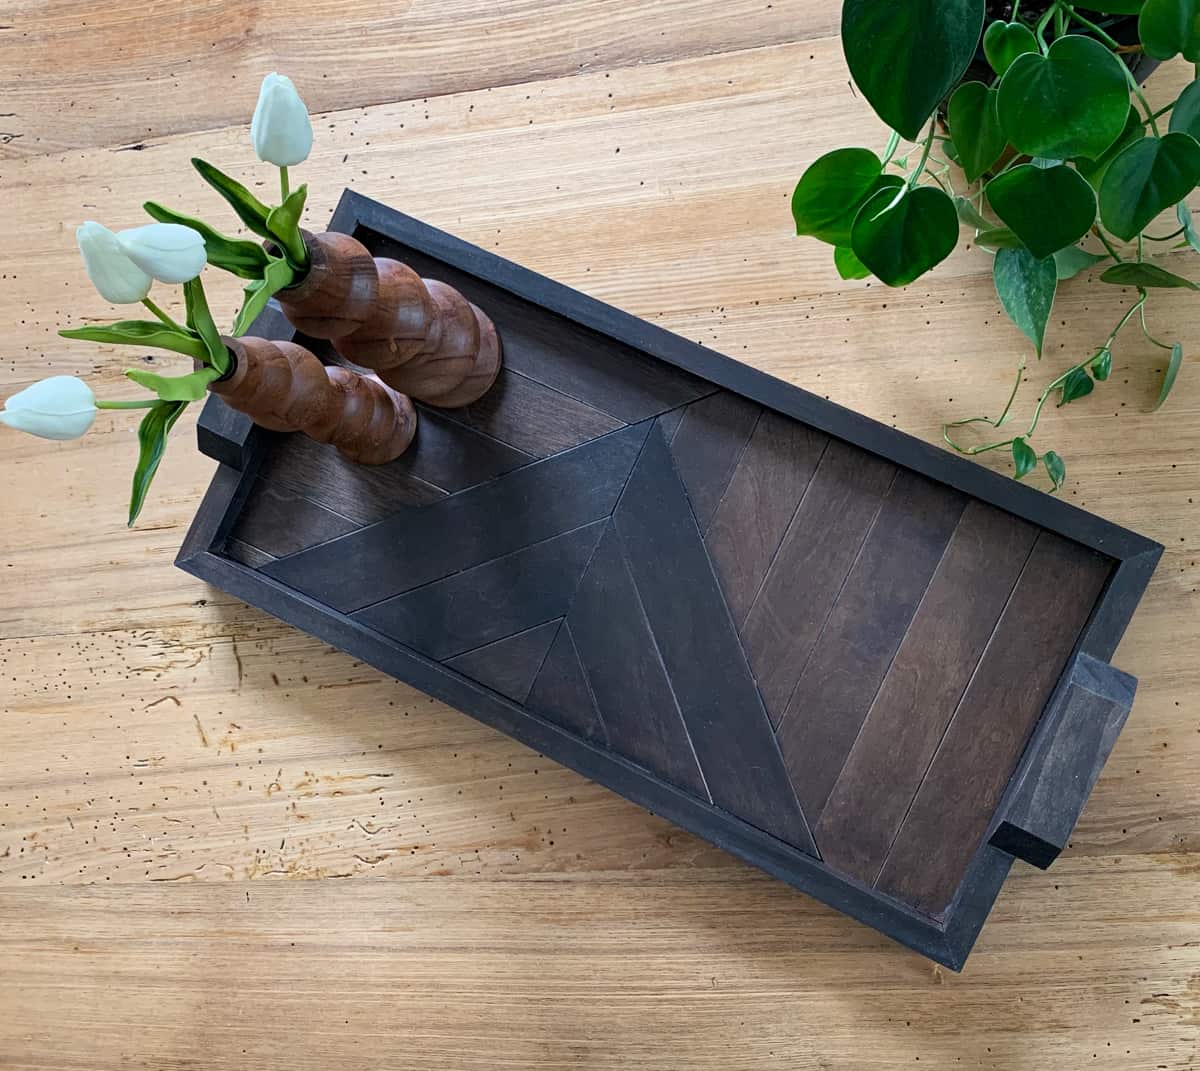 How to Build a Folding Serving Tray - This Old House